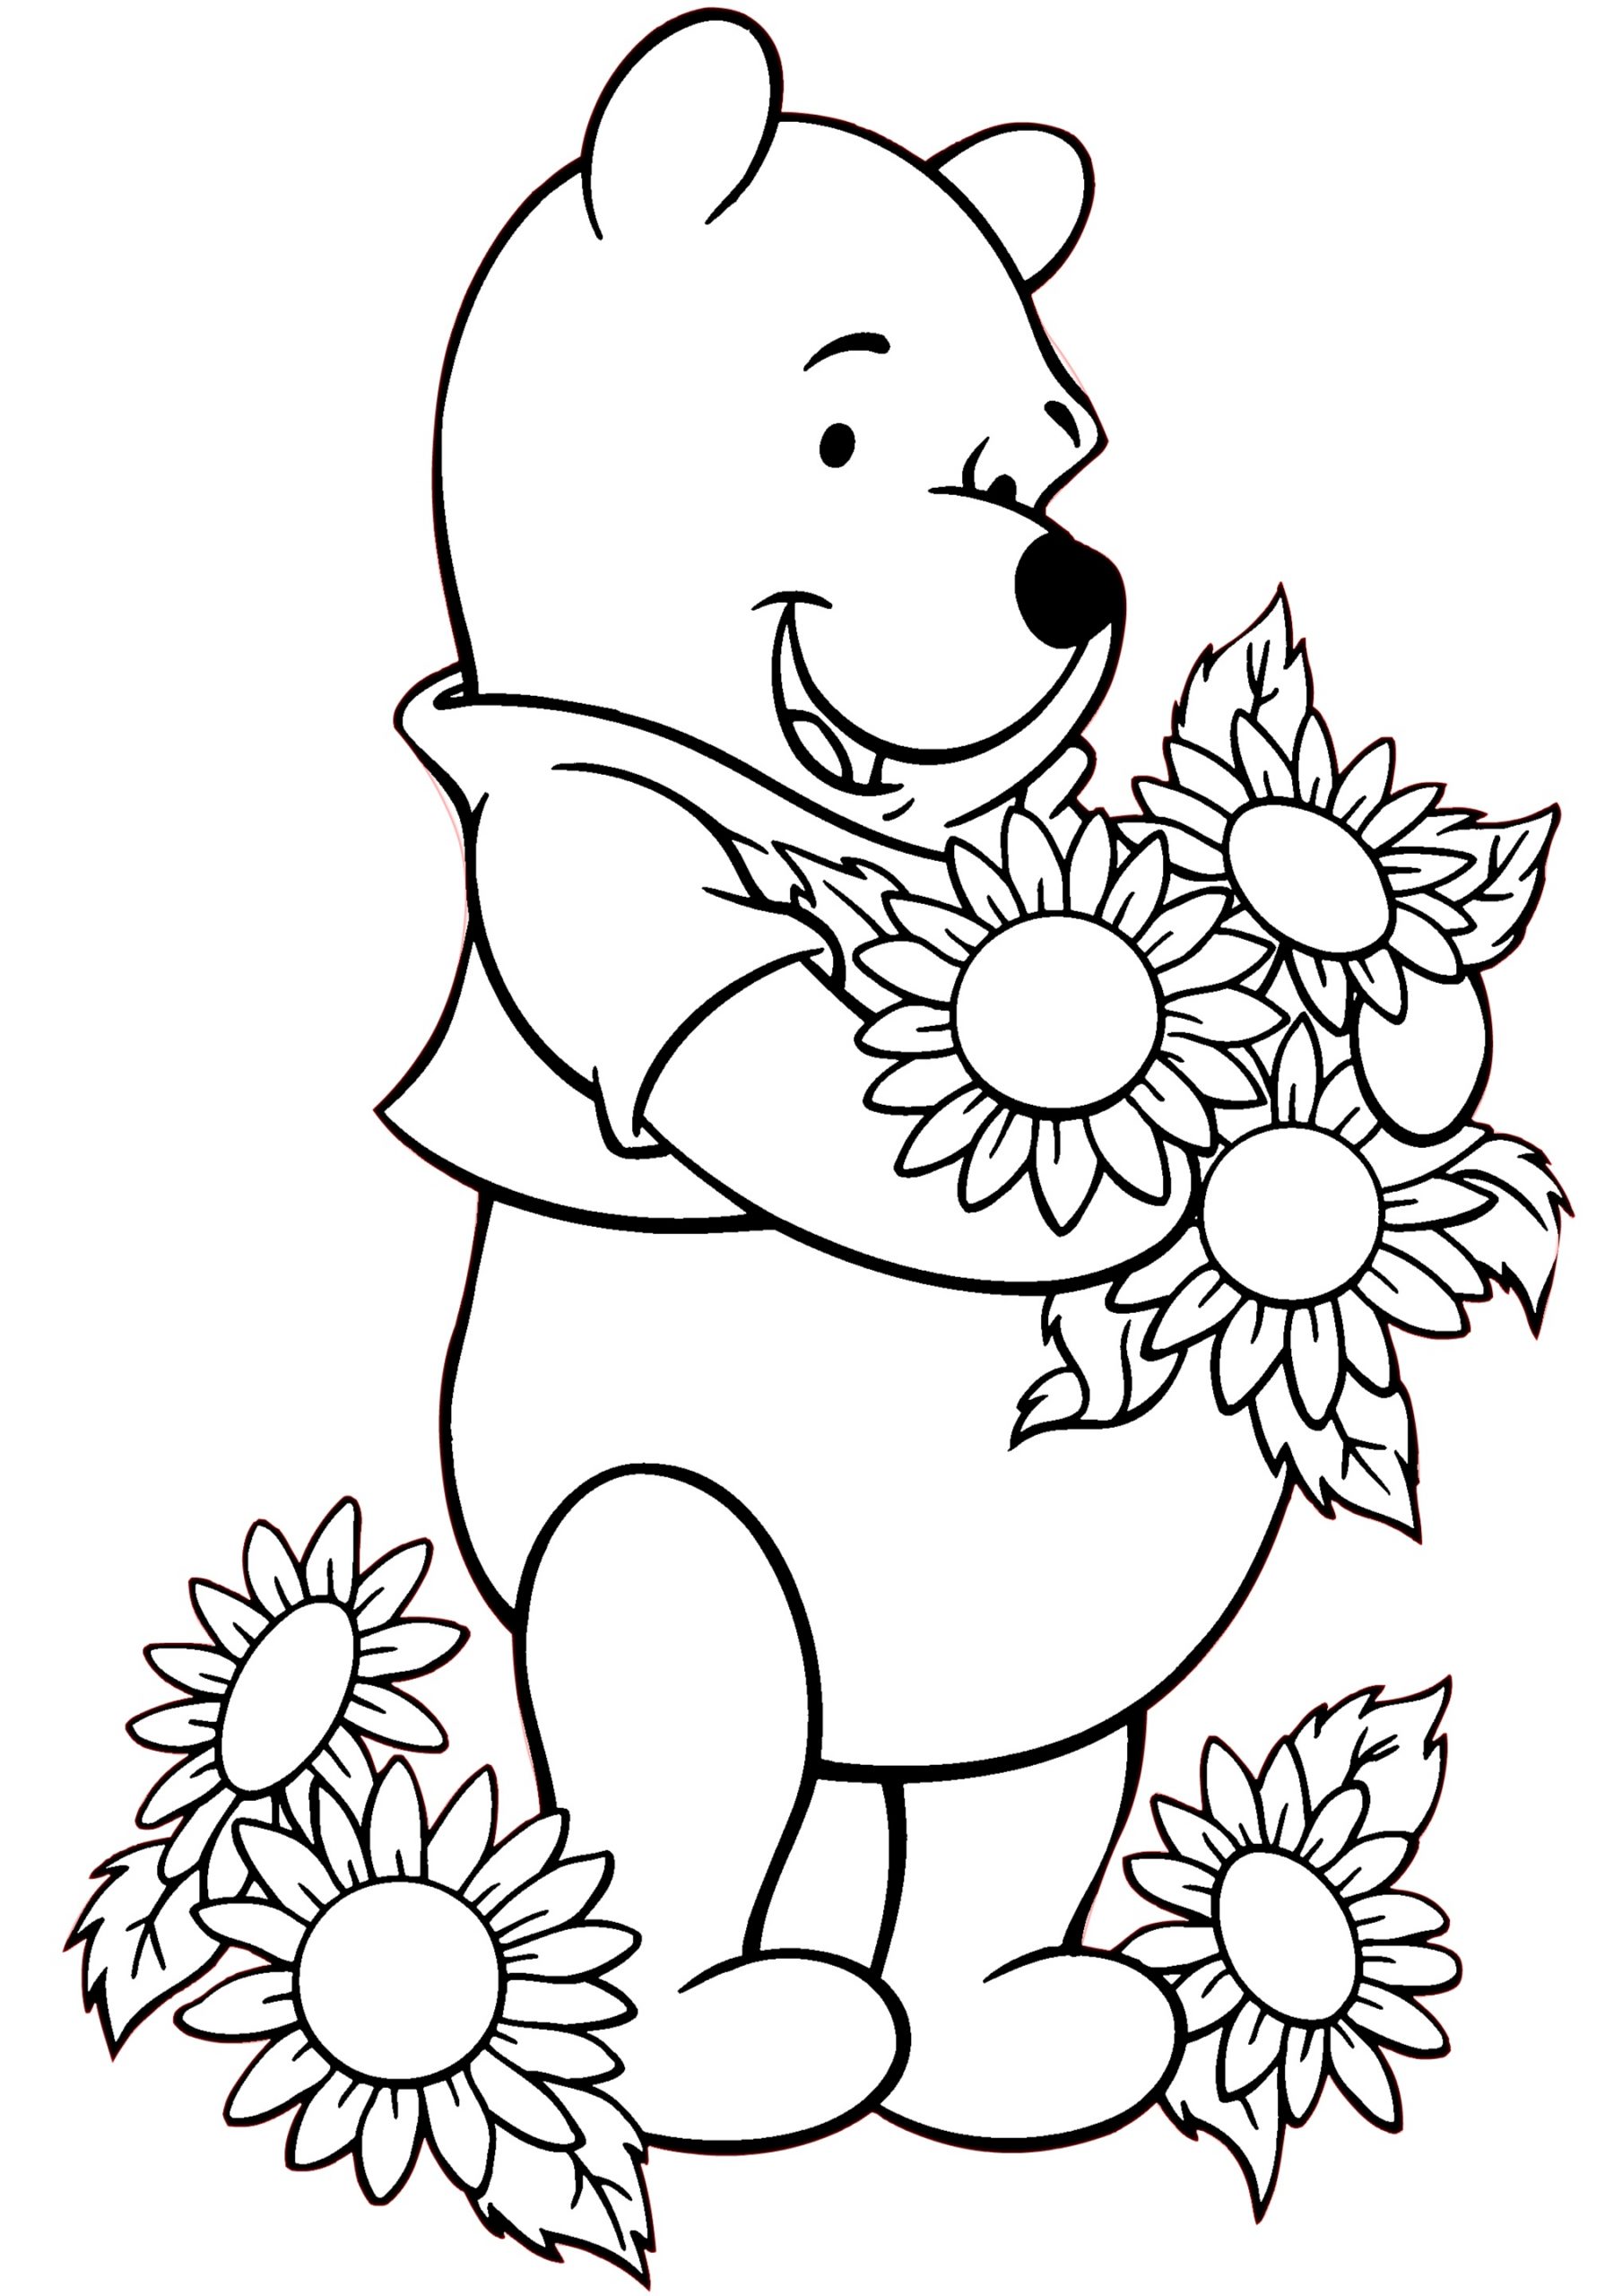 Walt Disney Printable Winnie the Pooh Coloring Pages Easy to Color